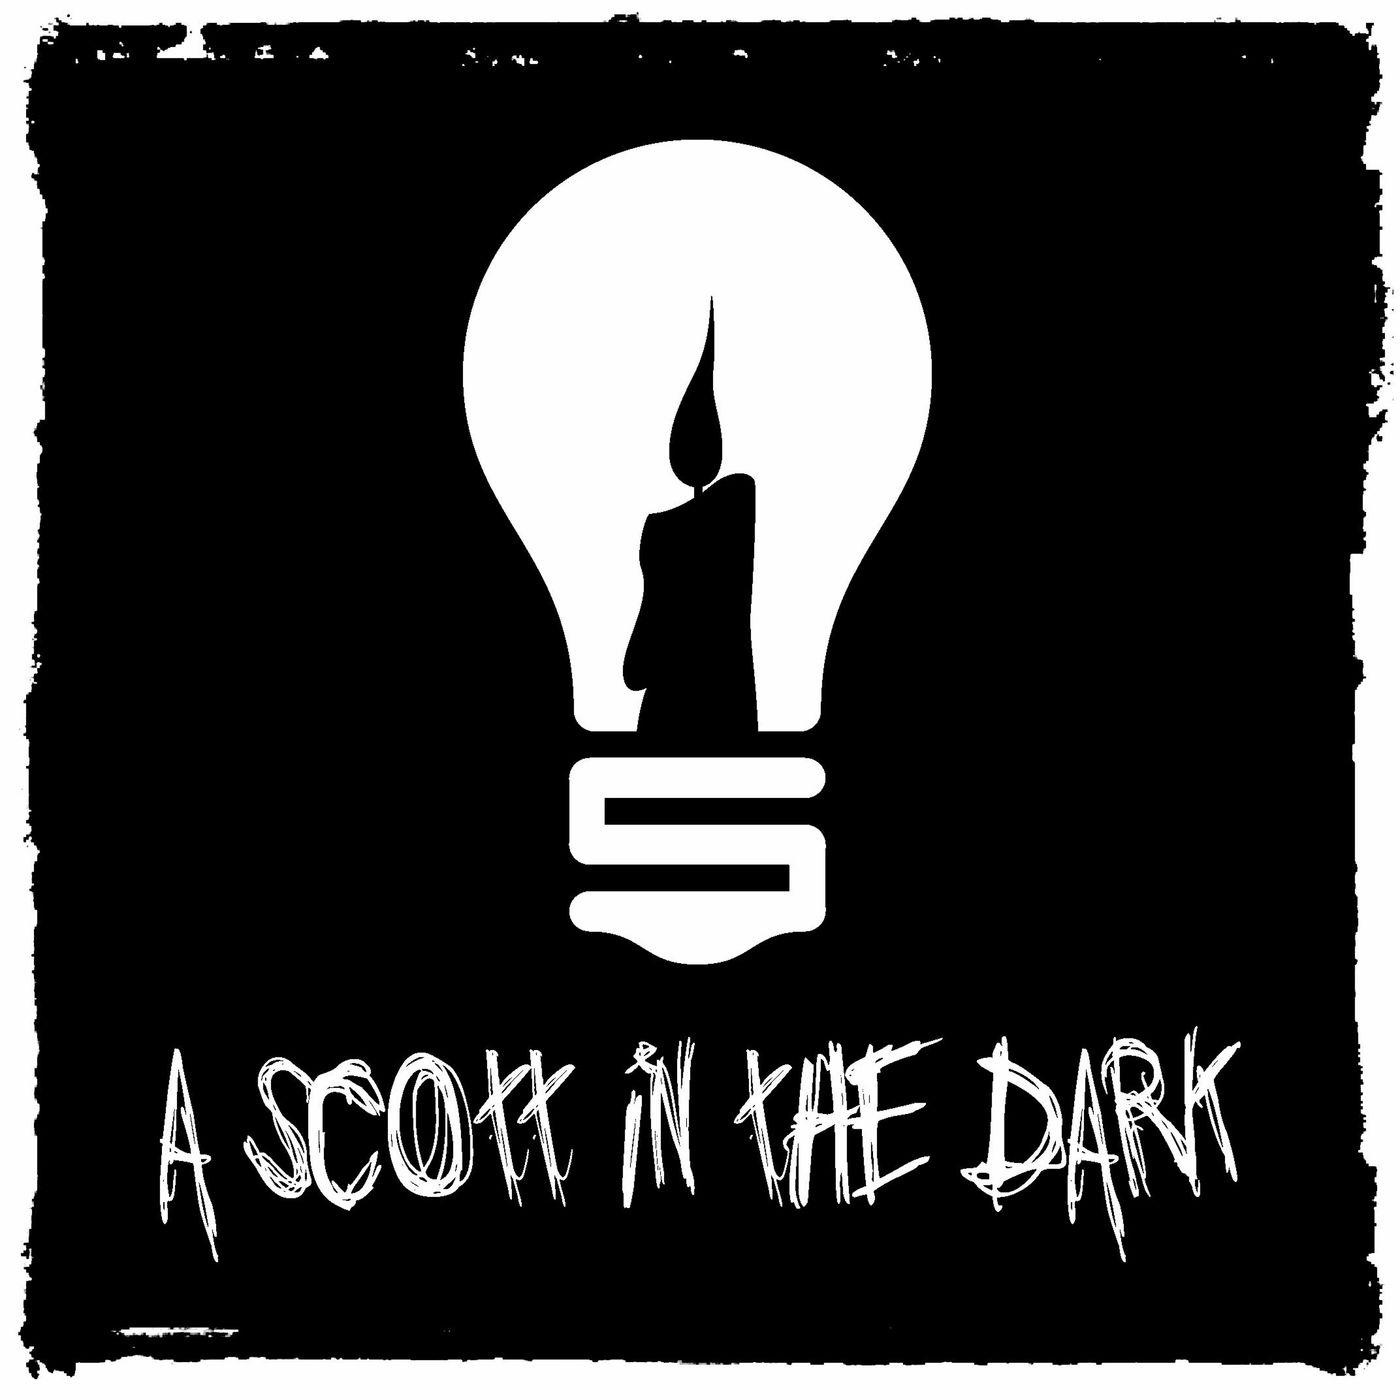 [A Scott in the Dark] Episode 45 Phases of Recovery